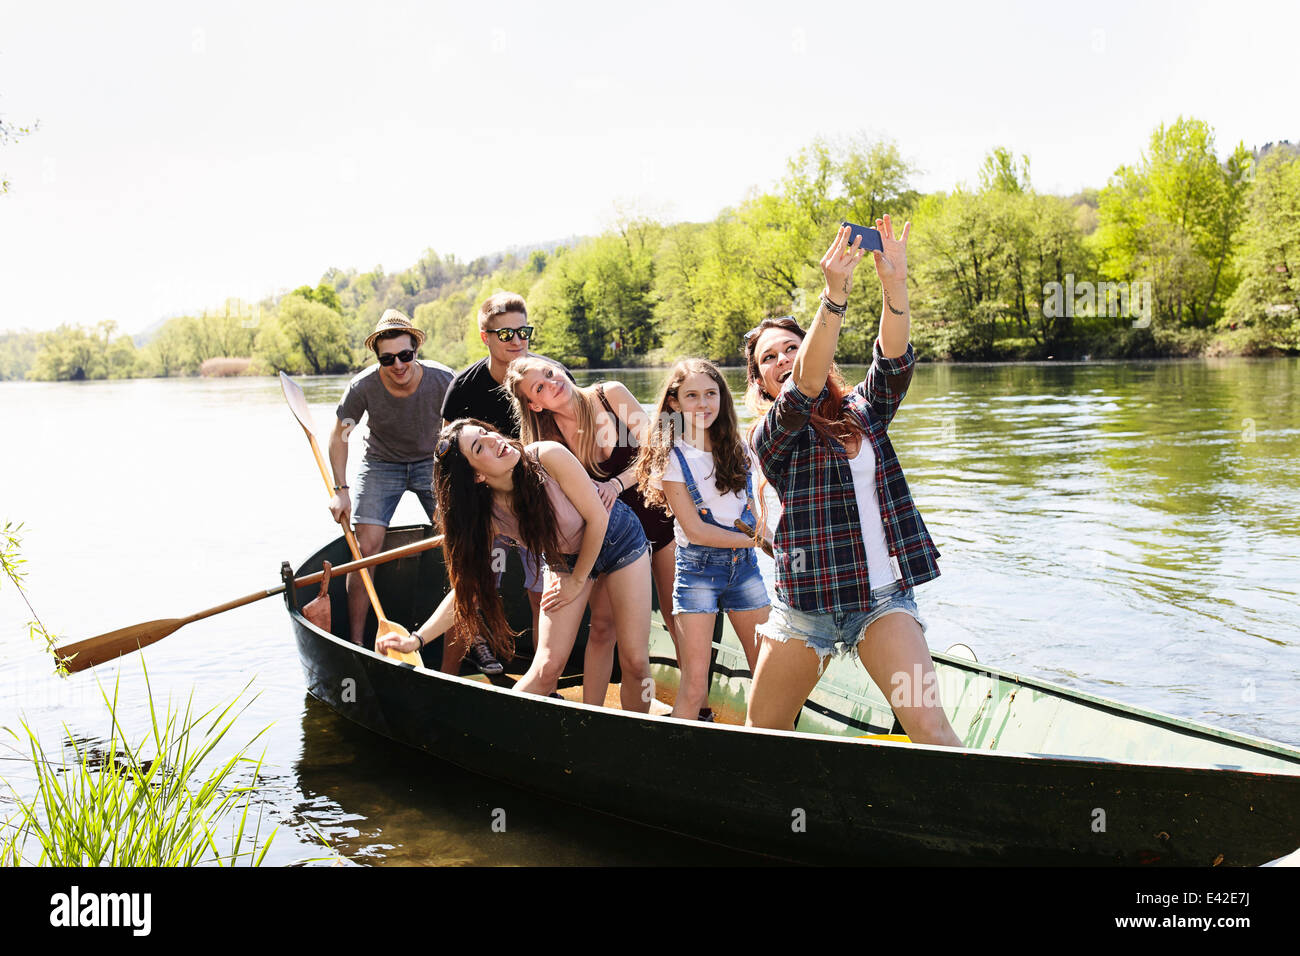 Group of friends in a row boat taking photo of themselves Stock Photo